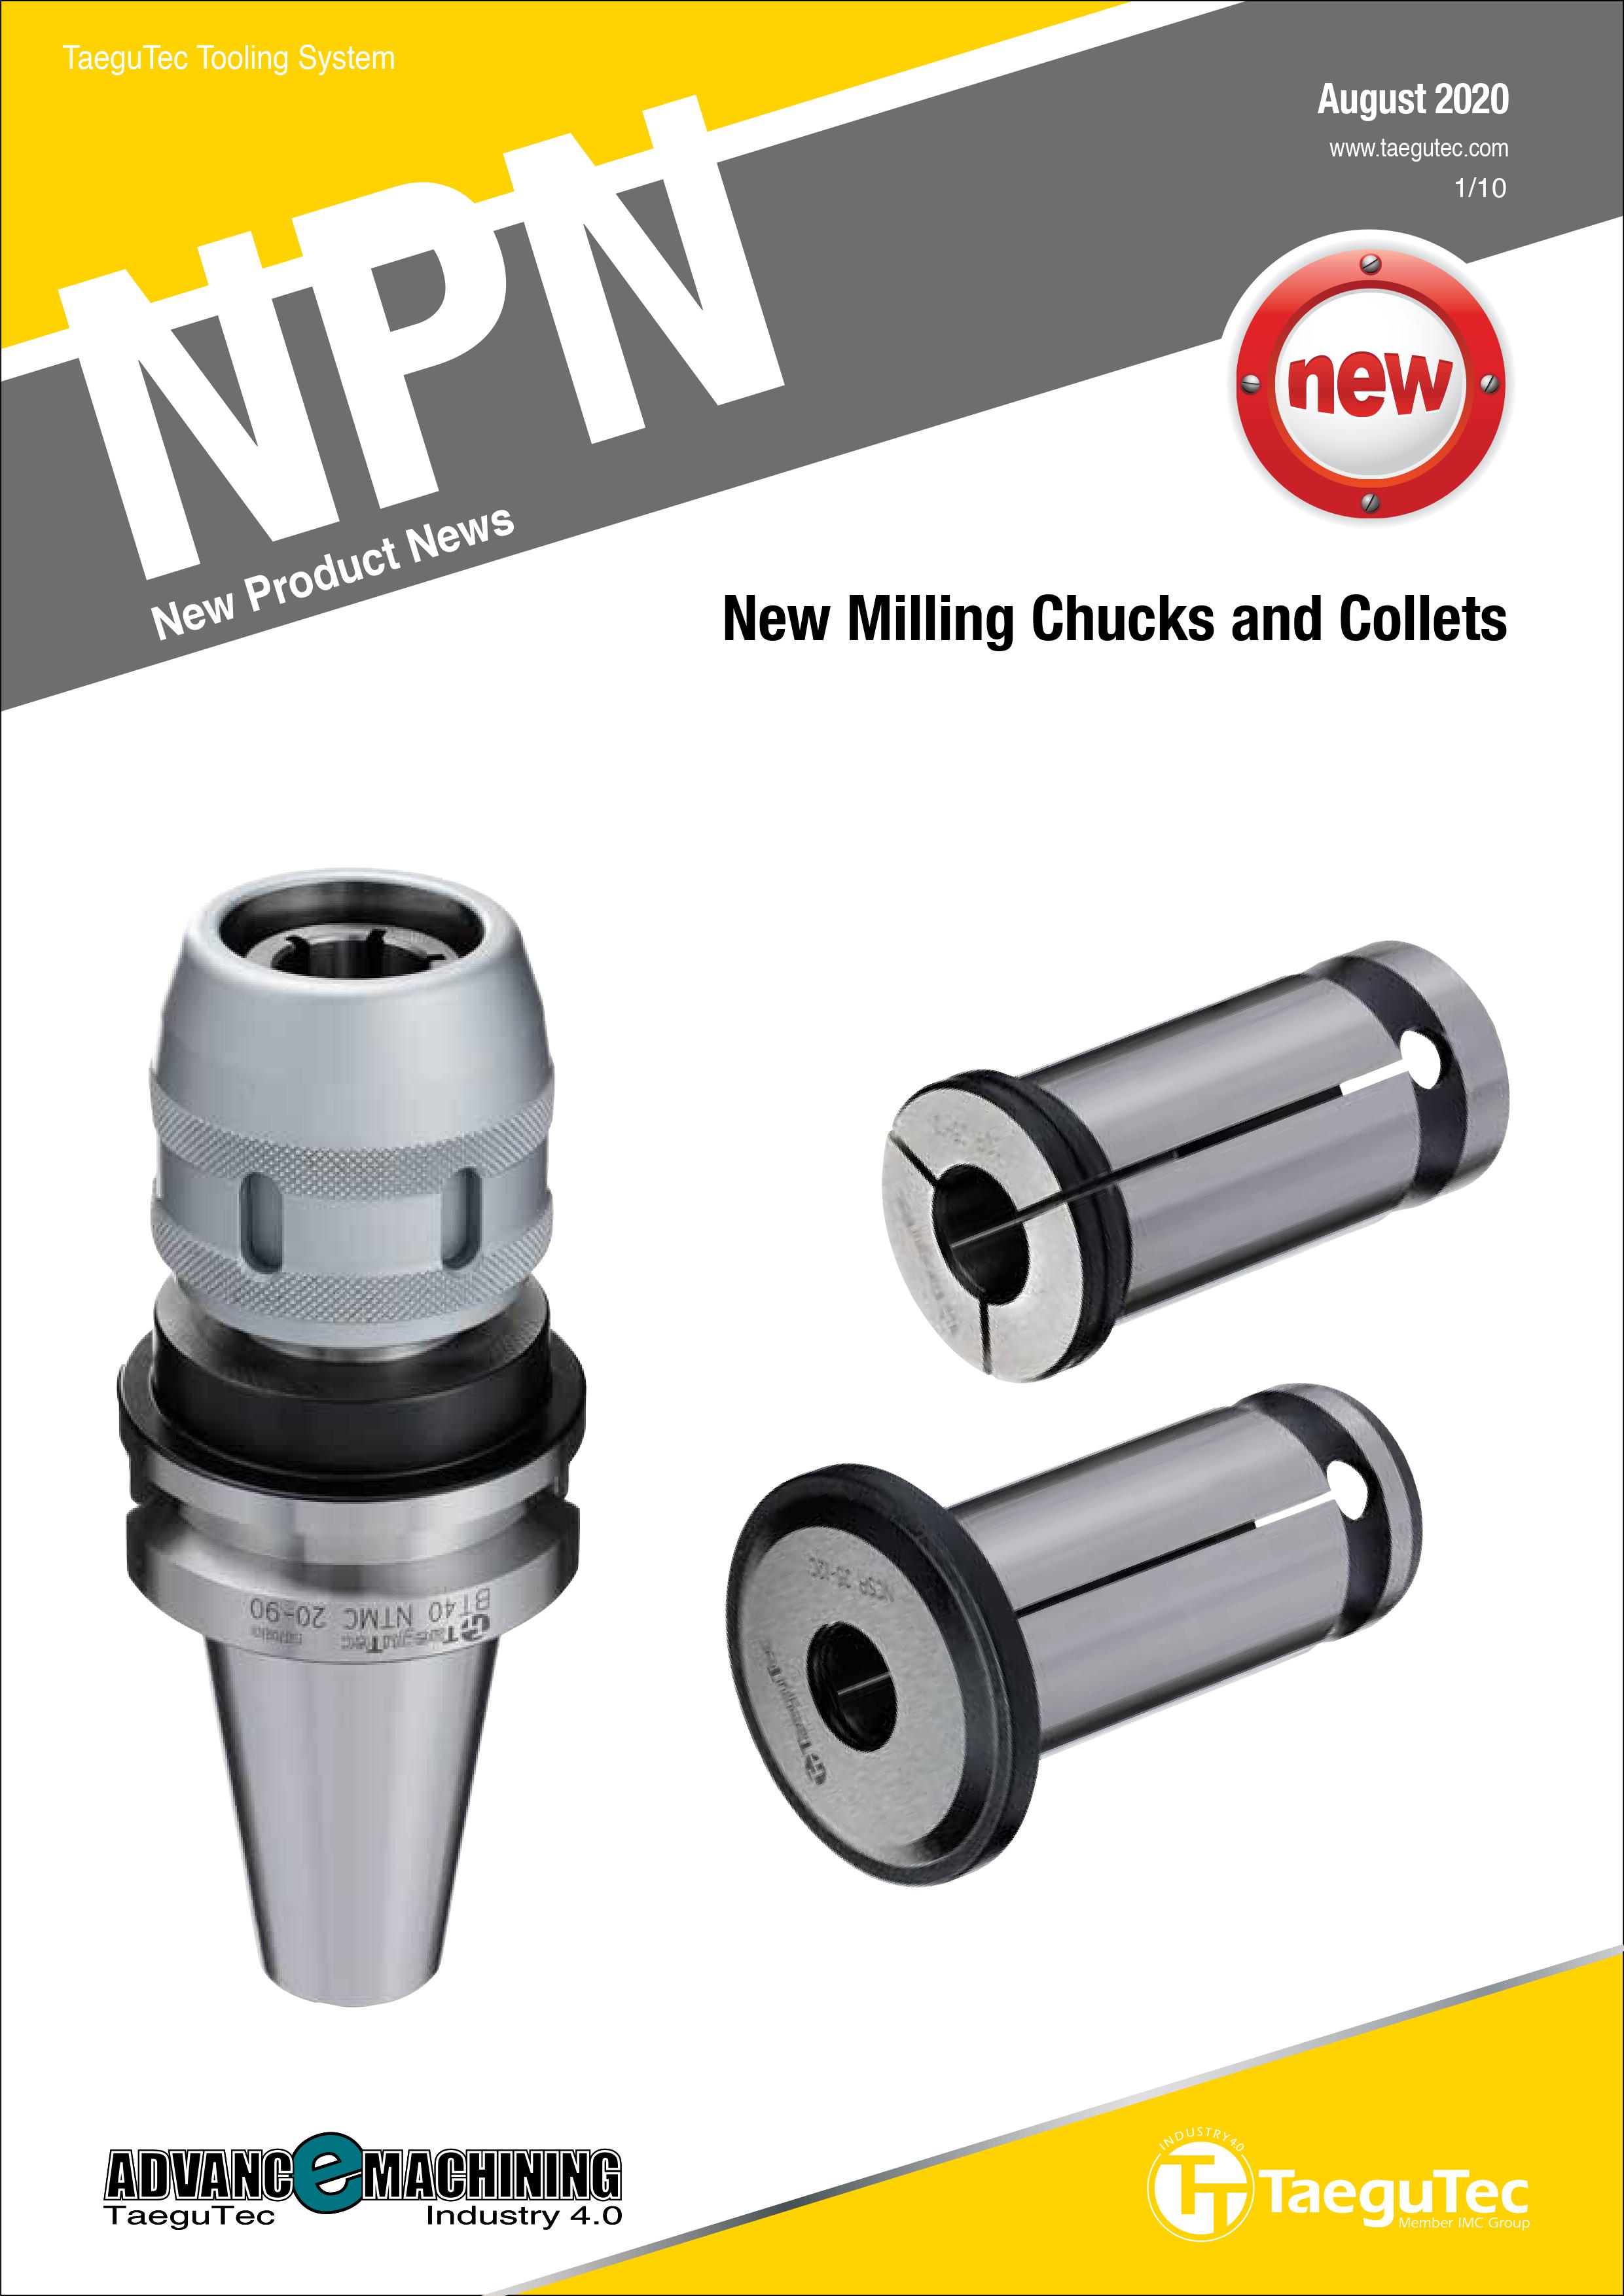 New Milling Chucks and Collets